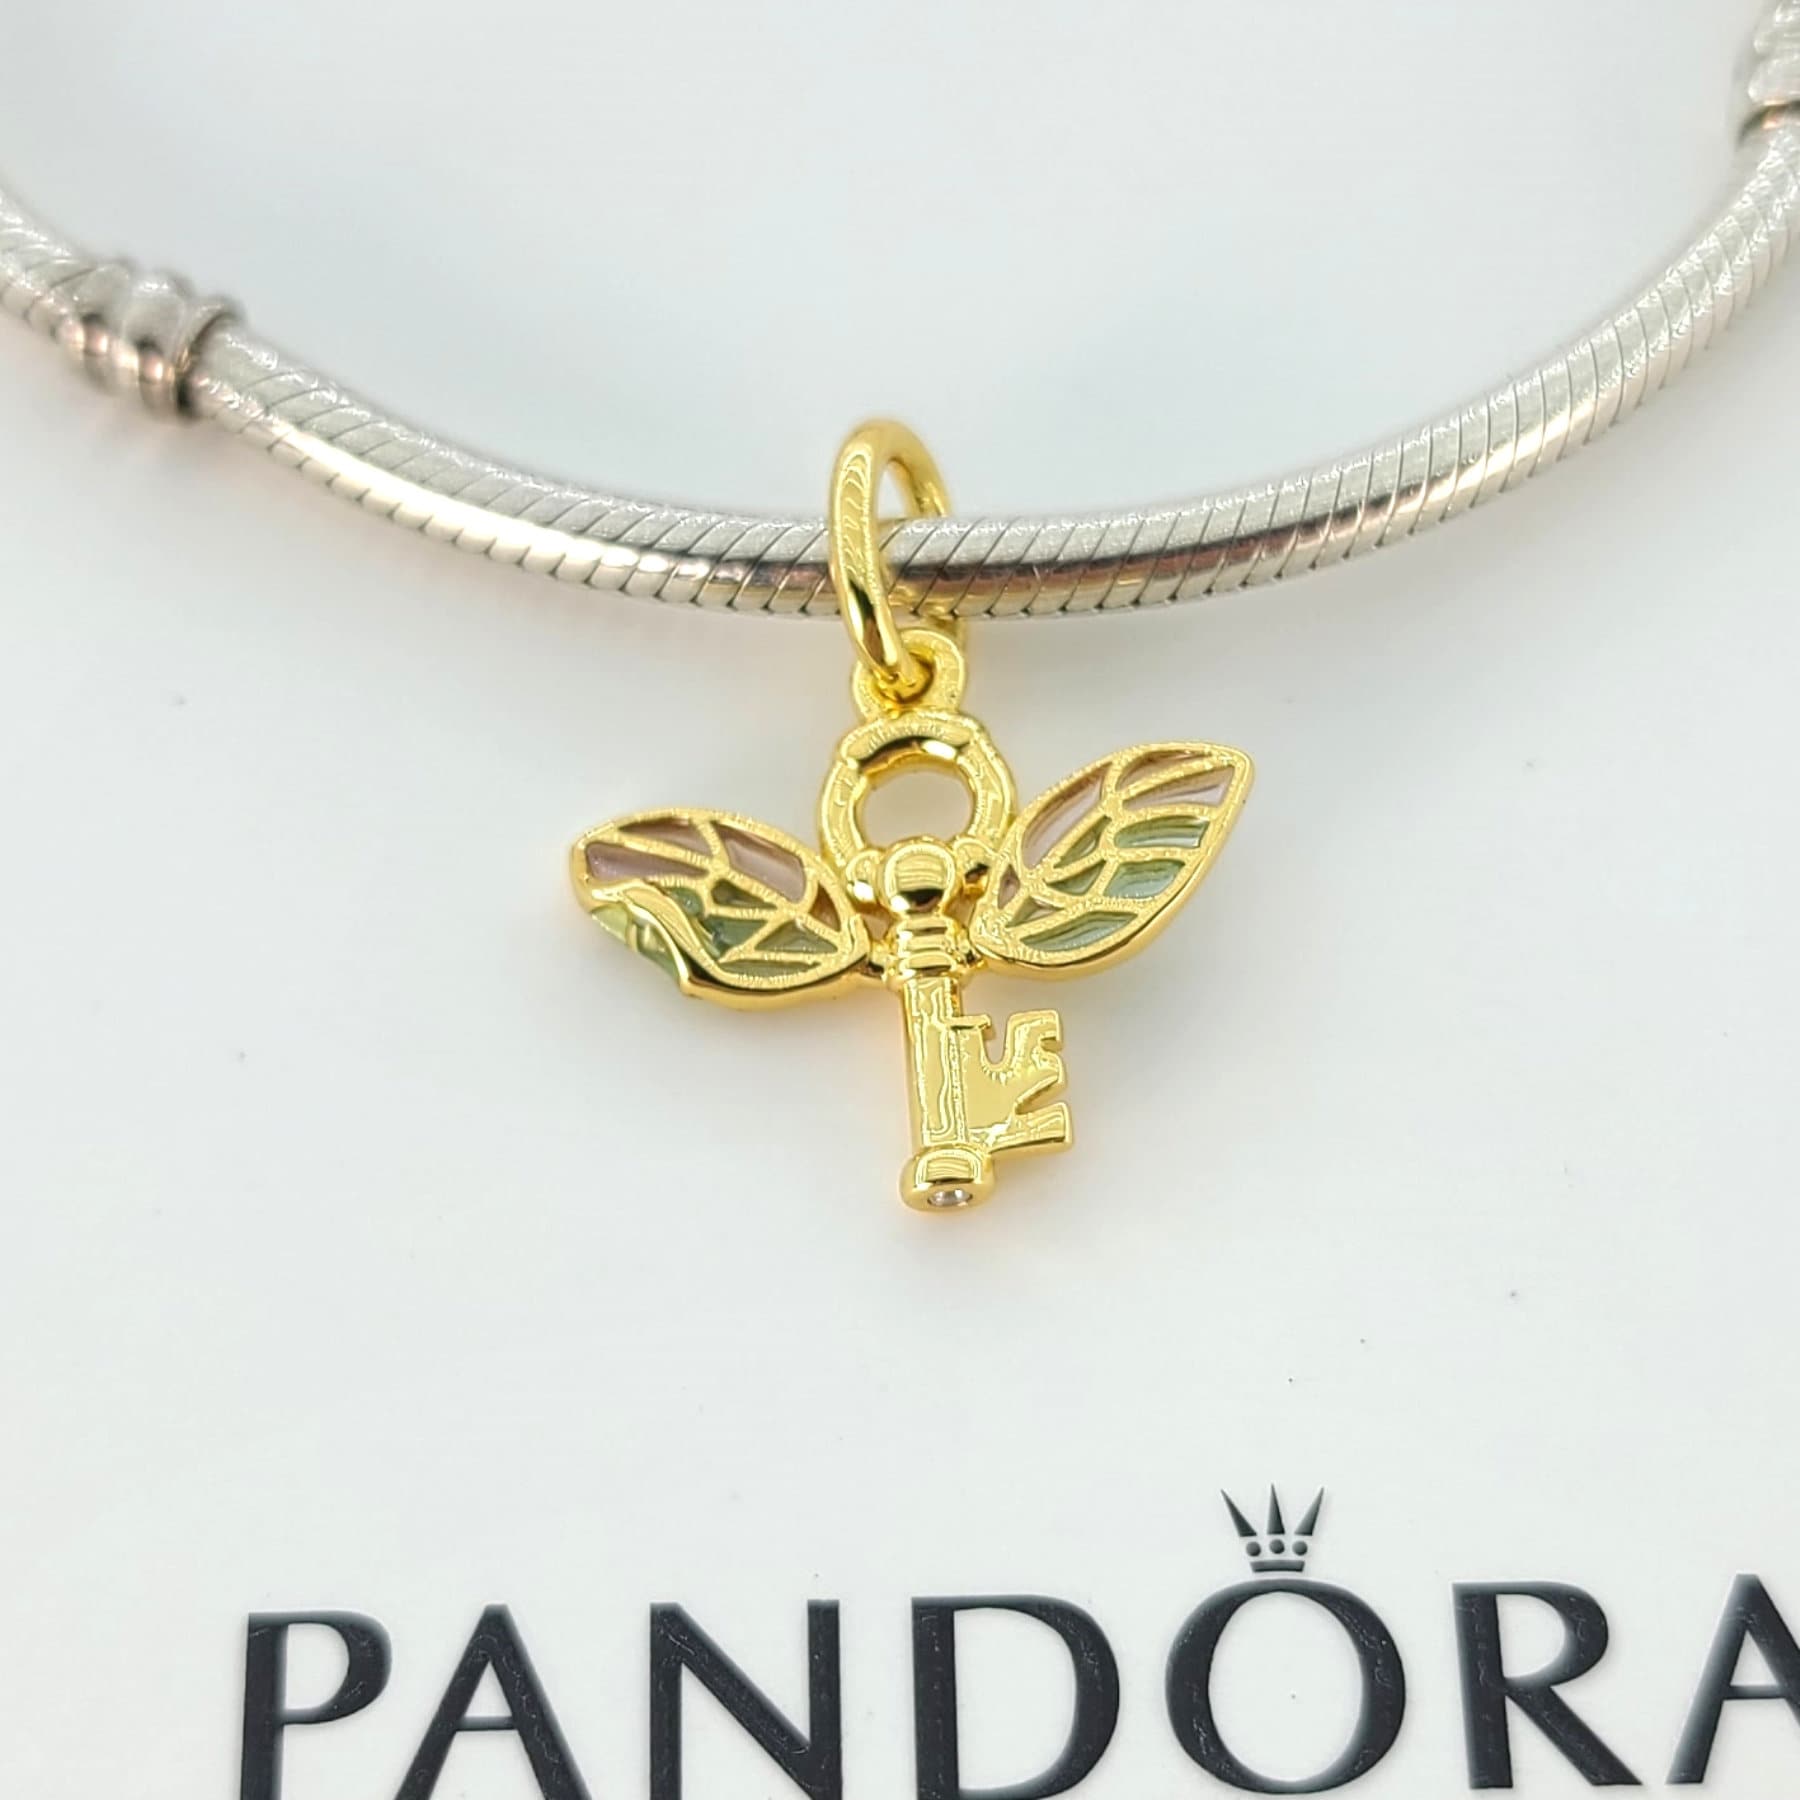 NanMuc Queen Bee Pendant Charms for Pandora Charms Bracelets Birthday Gifts  for Sister Women Girls: Buy Online at Best Price in UAE - Amazon.ae